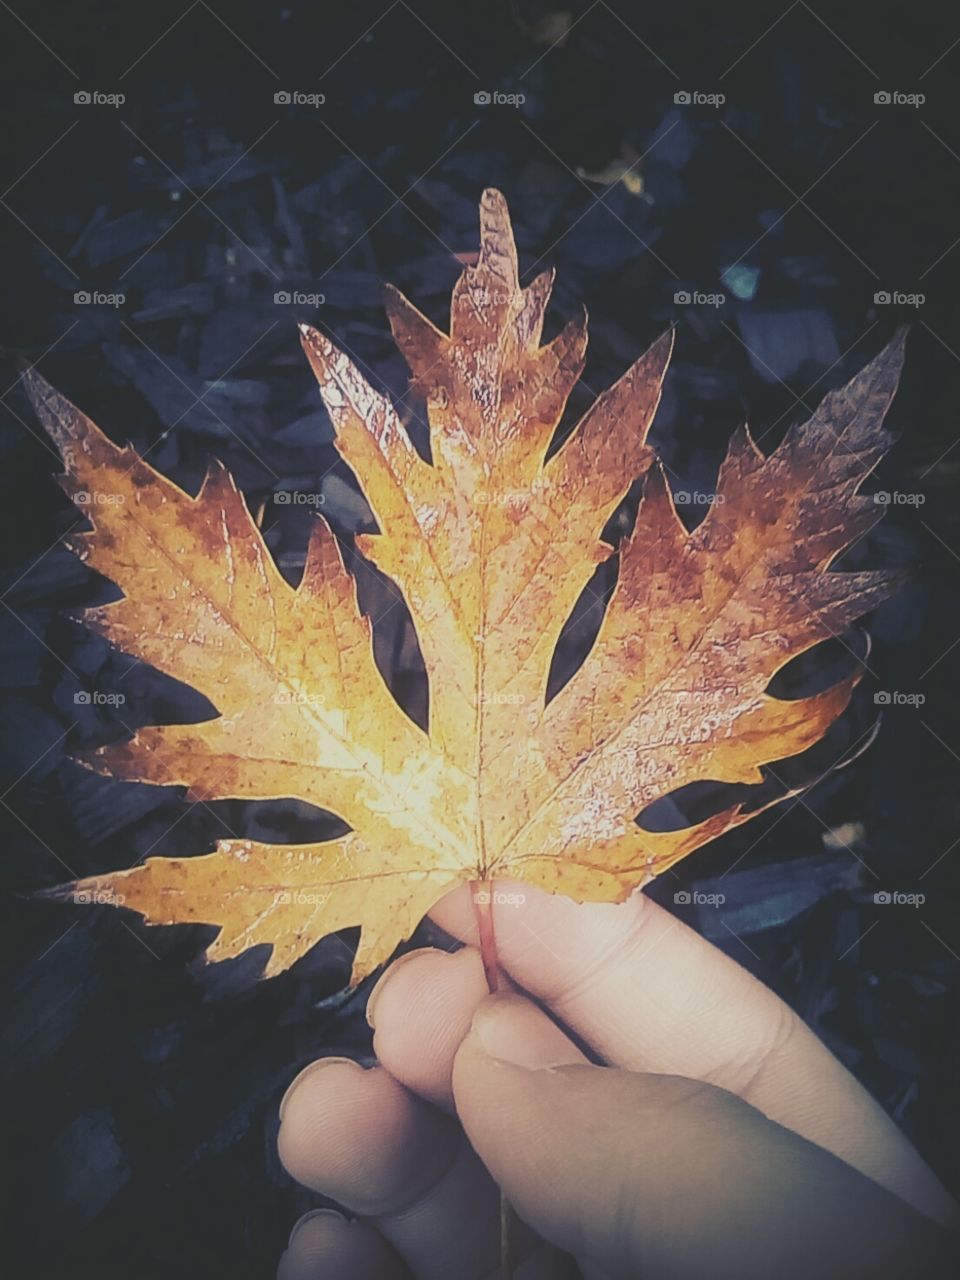 One simple leaf can hold so much Color and beauty.